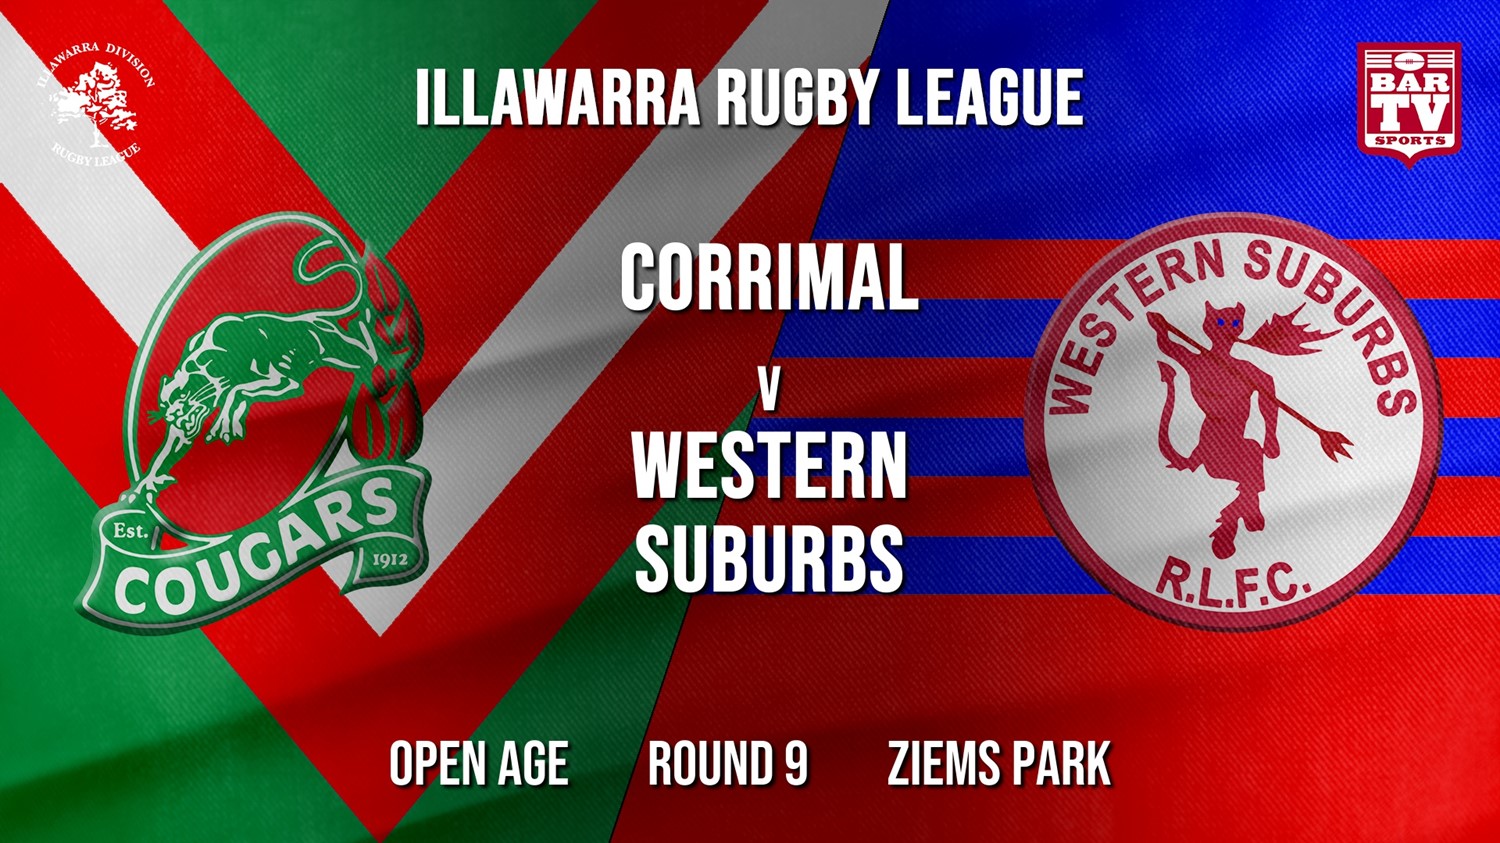 IRL Round 9 - Open Age - Corrimal Cougars v Western Suburbs Devils Minigame Slate Image